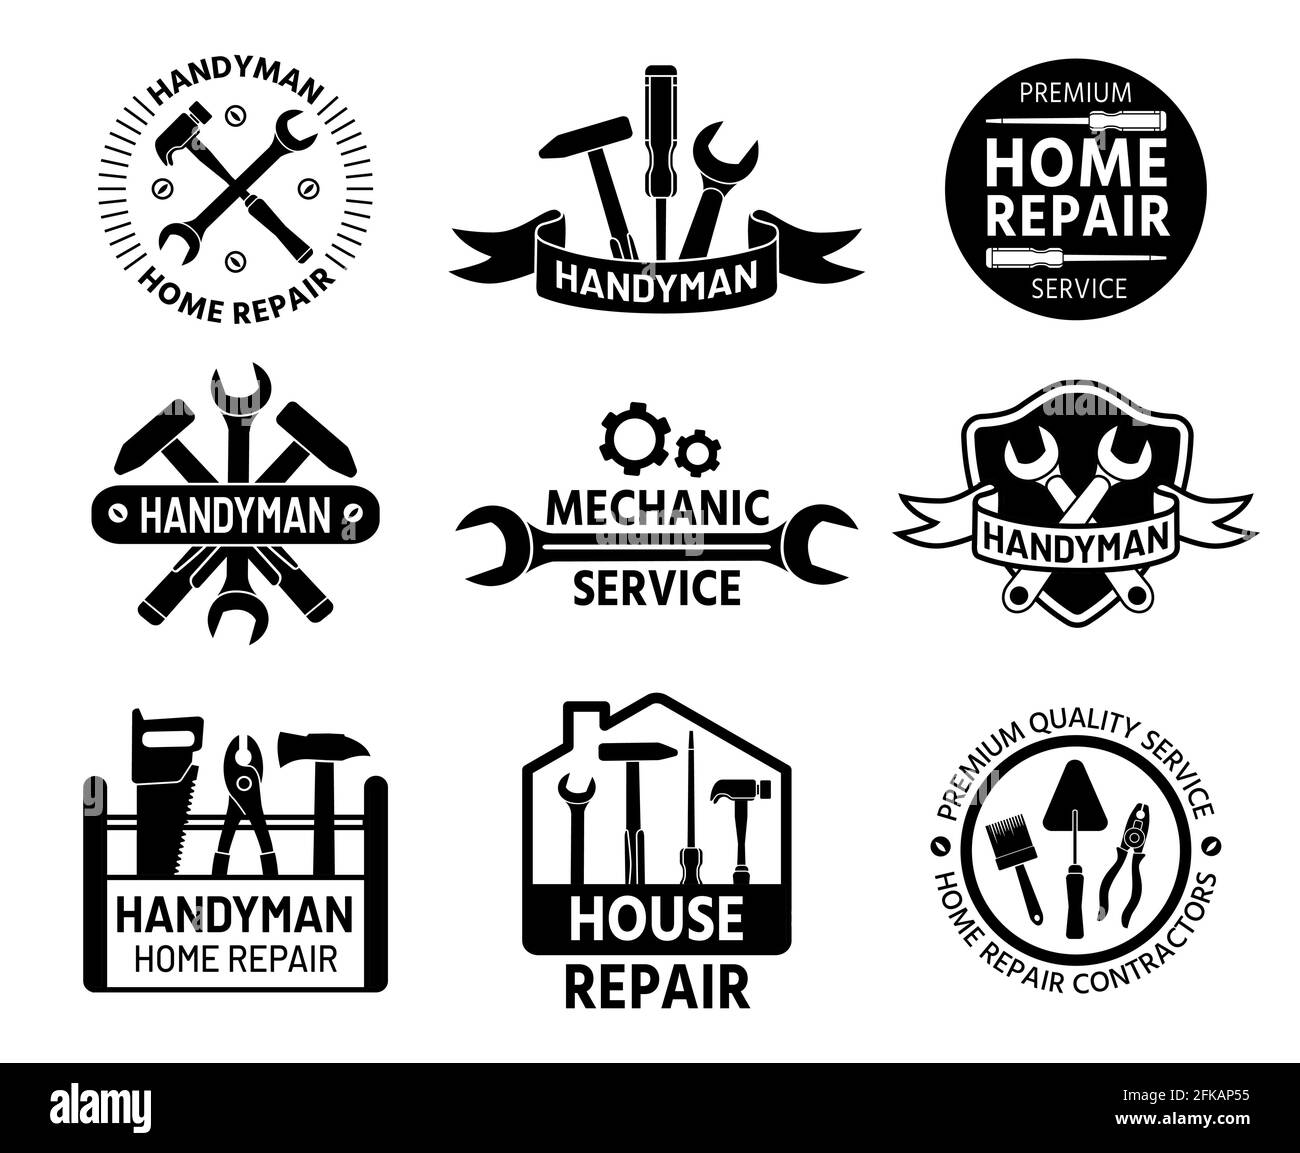 Handyman logo. Mechanic and home repair service logos with construction and handy tools, wrench and hammer. Builder company stamp vector set Stock Vector